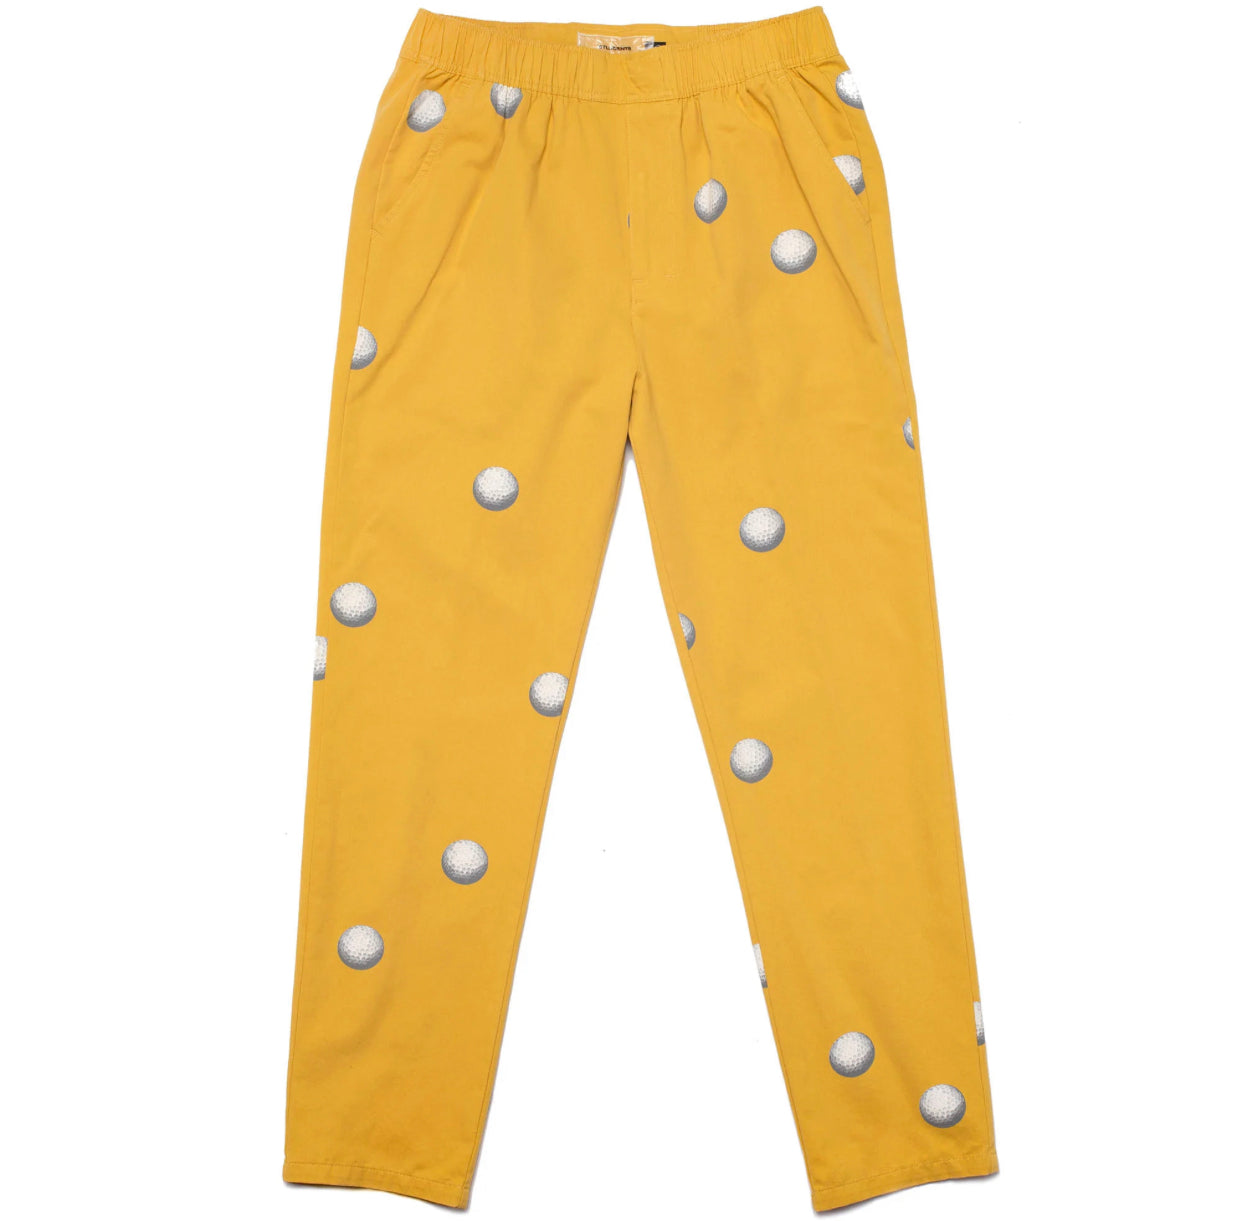 Students Relax Pants - Yellow